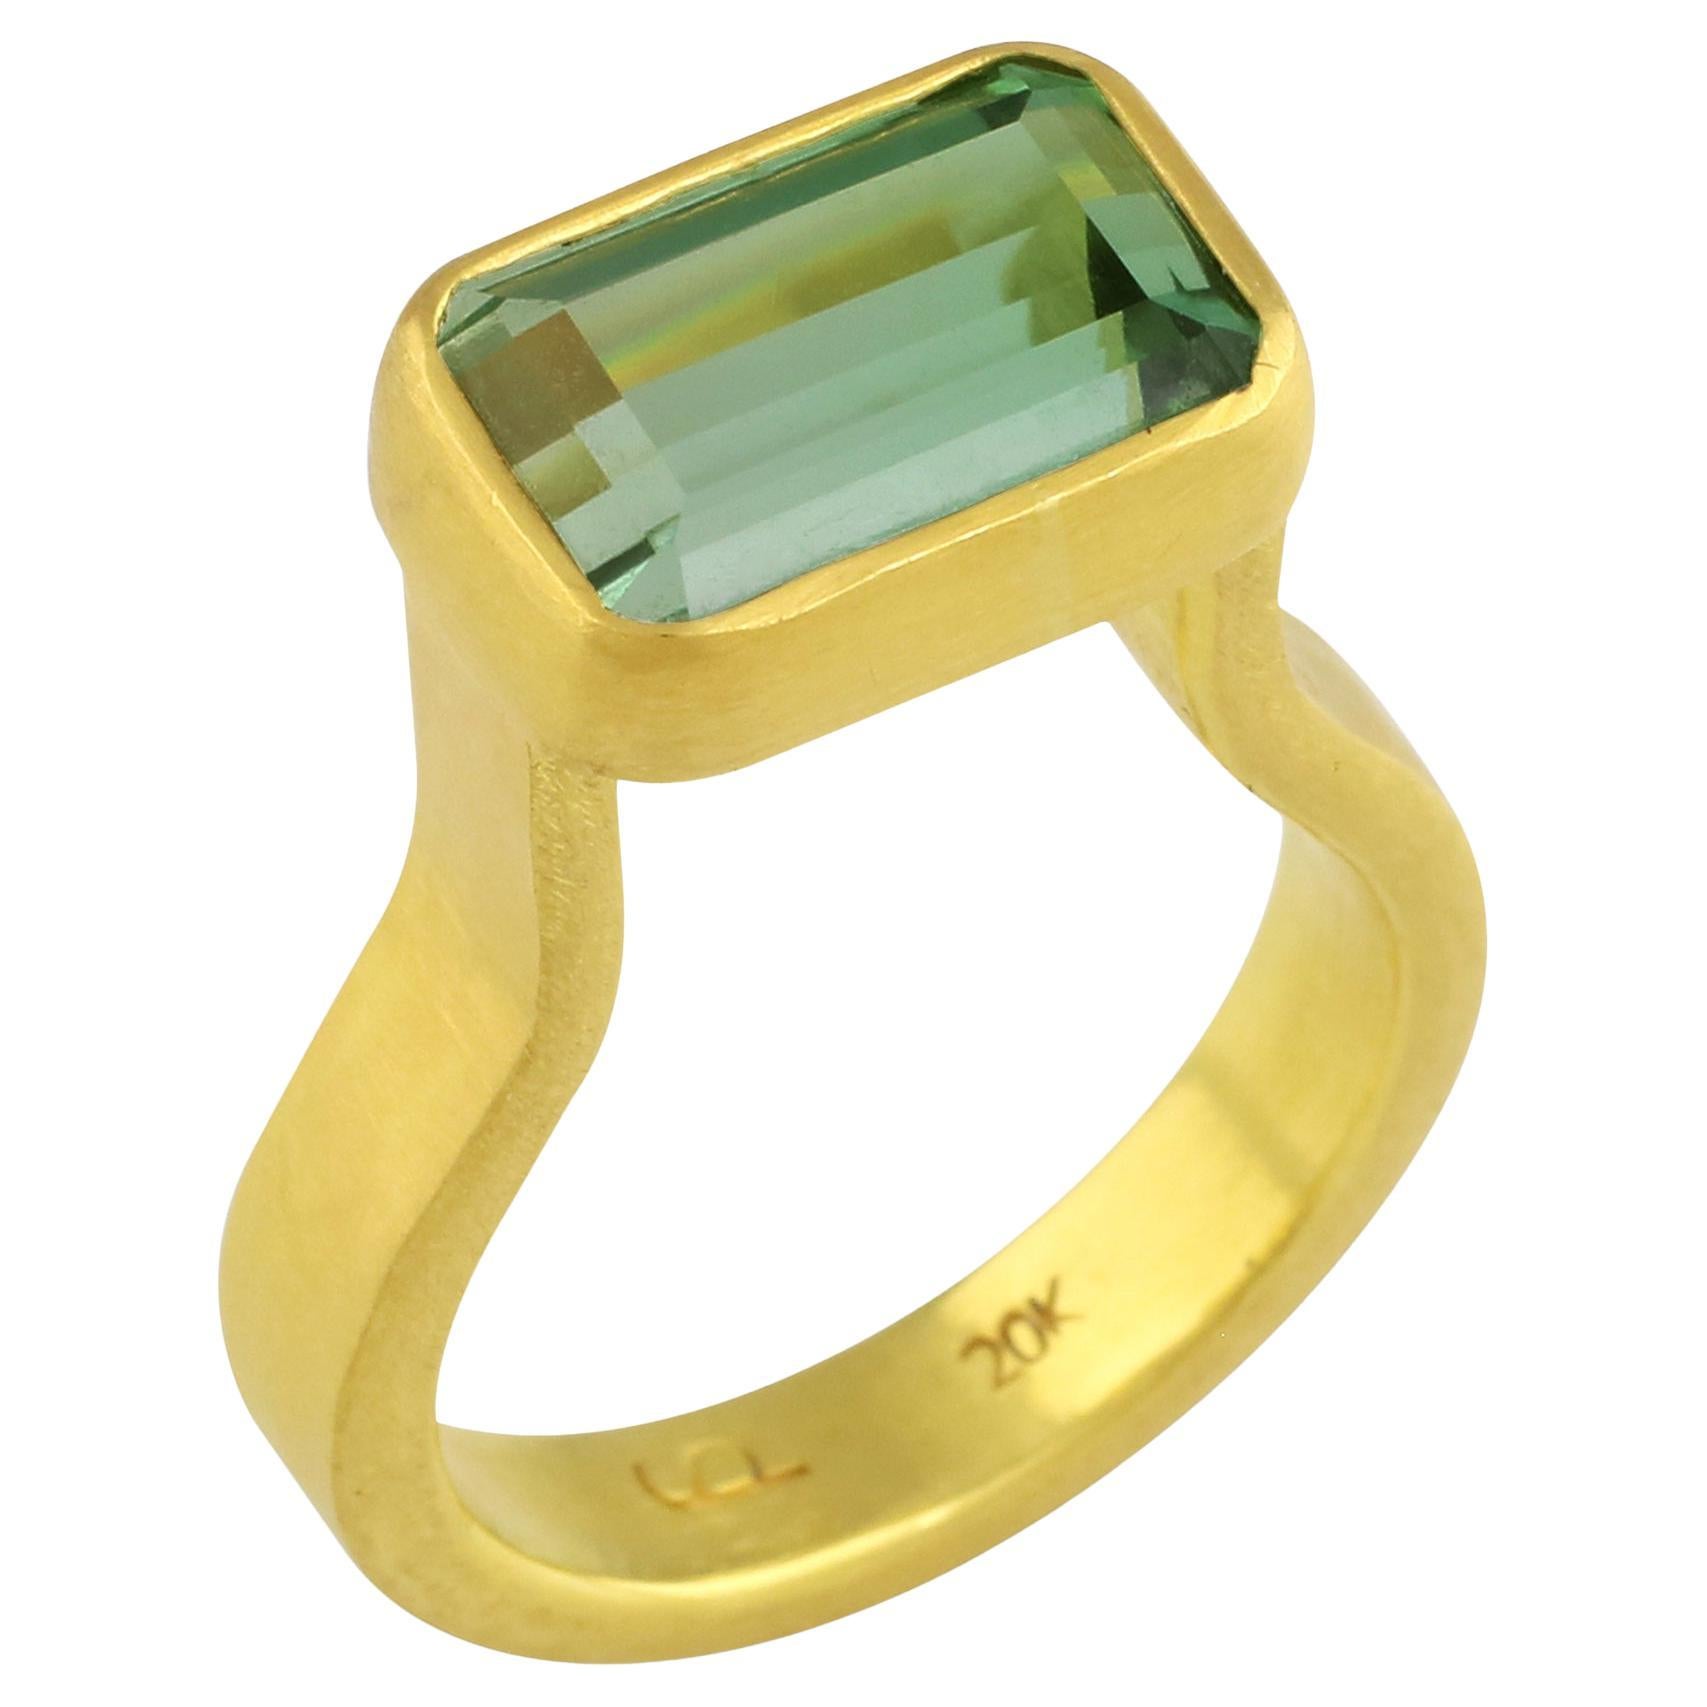 PHILIPPE SPENCER 5.26 Ct. Green Tourmaline in 22K and 20K Gold Statement Ring For Sale